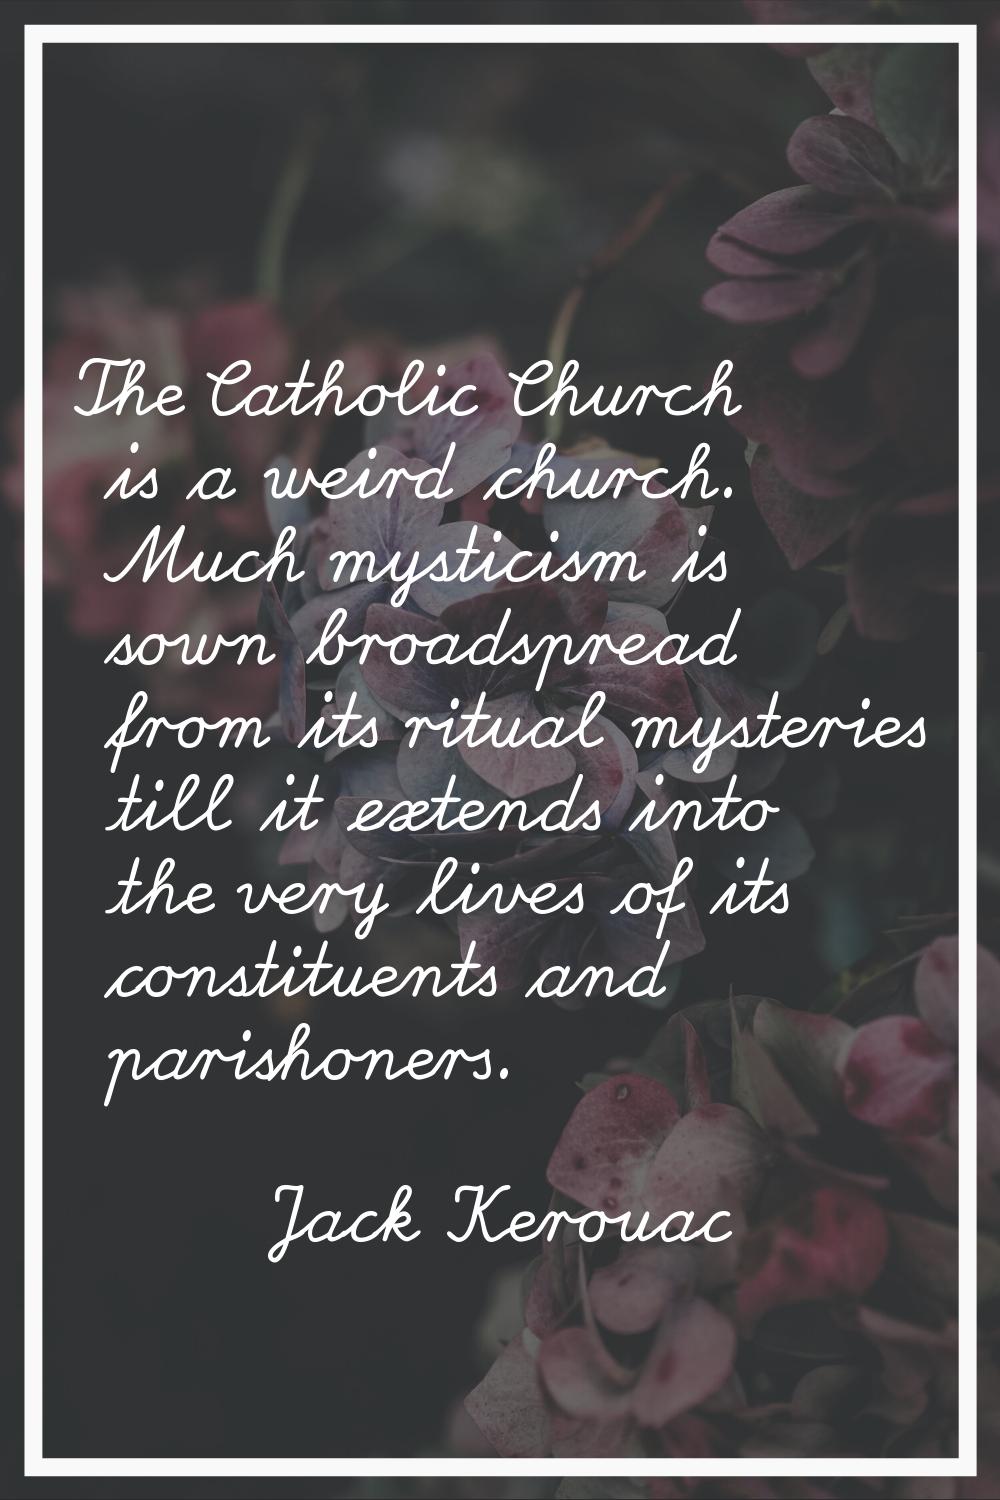 The Catholic Church is a weird church. Much mysticism is sown broadspread from its ritual mysteries